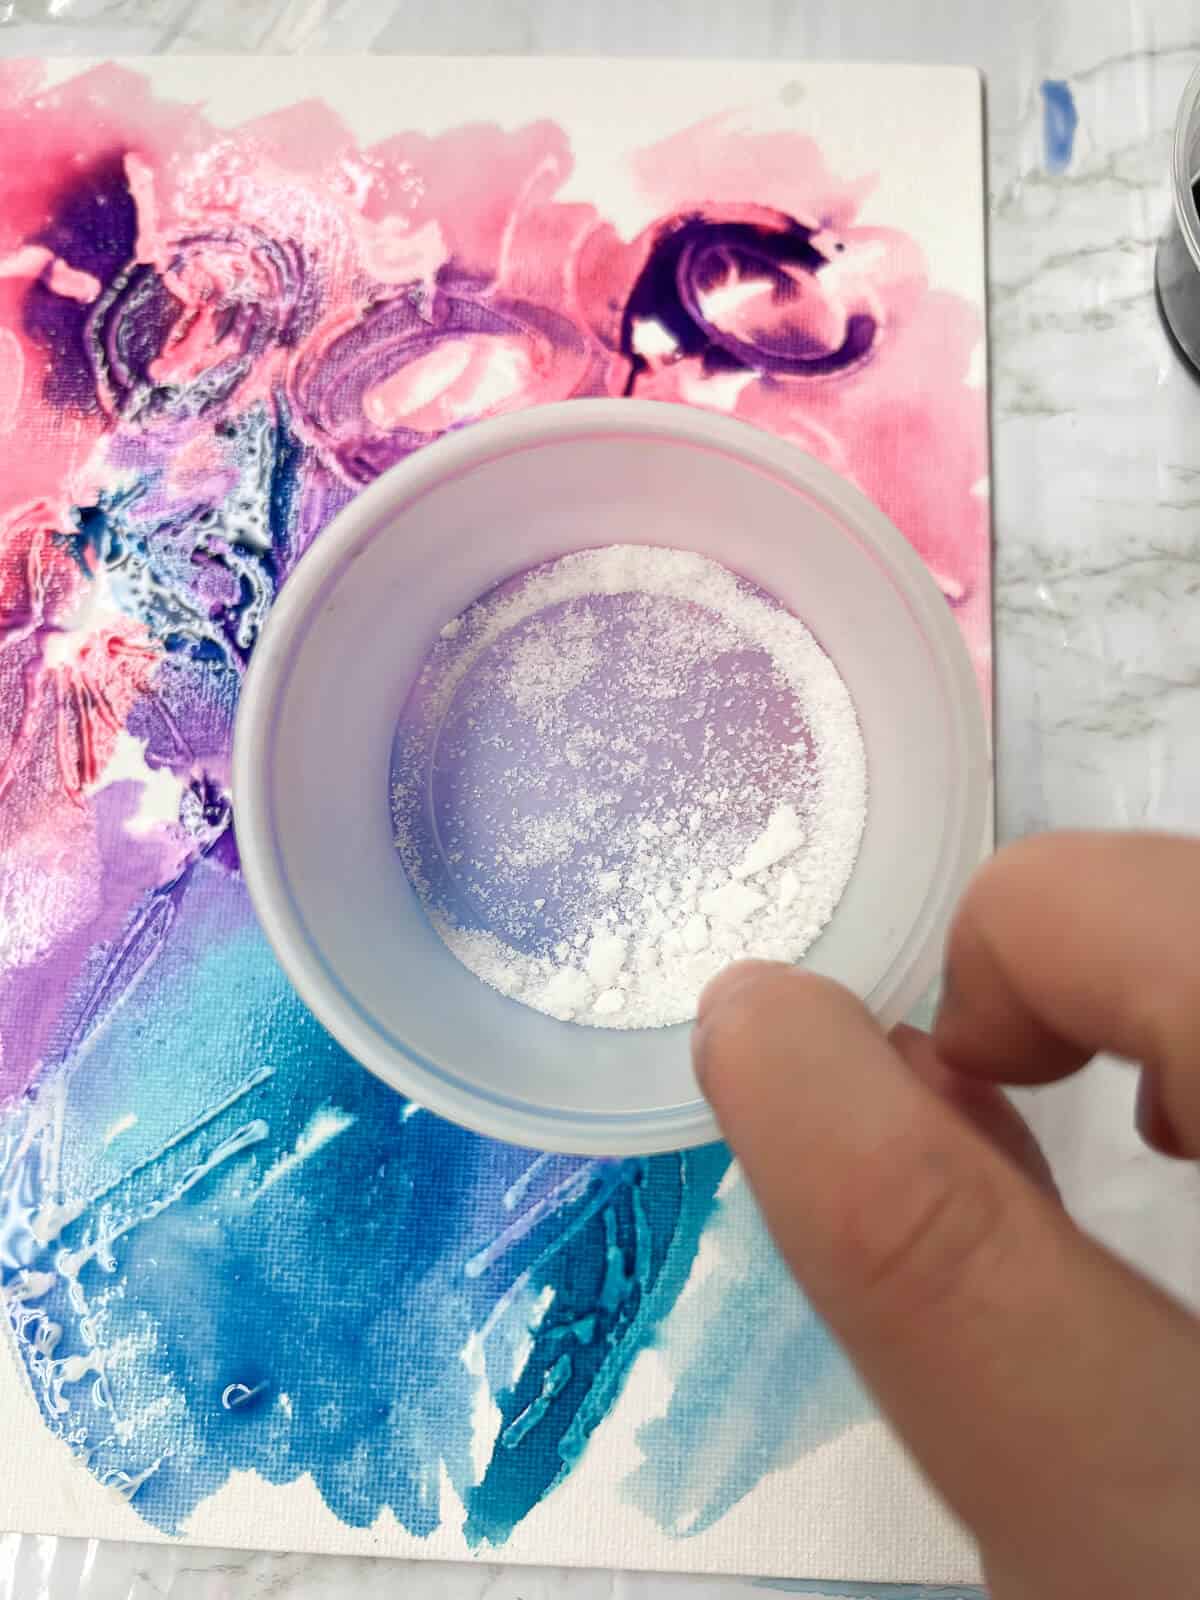 salt in a little cup being on top of watercolor painting done with glue and liquid watercolor paint.